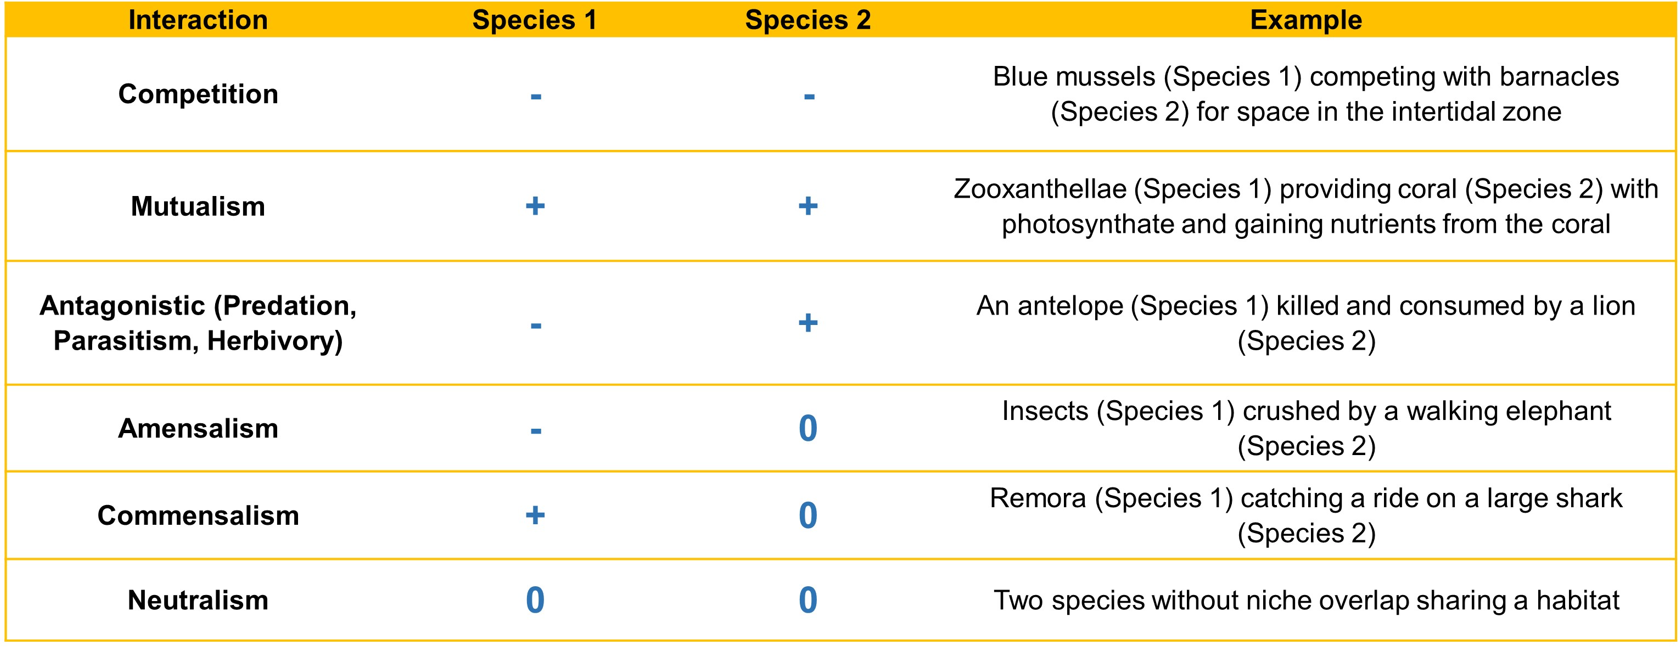 A table shows types of interactions, the effects on each of the two species interacting, and an example. Competition has a negative effect on both species and the example is blue mussels competing with barnacles in the intertidal zone. Mutualism has a positive effect on both species, and the example is zooxanthellae providing coral with photosynthate and gaining nutrients from the coral. Antagonistic interactions, including predation, parasitism, and herbivory have a negative effect on one species and a positive effect on the other. The example is antelope being killed and consumed by a lion. Amensalism has a negative effect on one species and a neutral effect on the other, exemplified by insects that are crushed by a walking elephant. Commensalism benefits one species with no effect on the other. The example is Remora catching a ride on a large shark. Neutralism has no effect on either species, as is the case with two species without niche overlap that share a habitat.